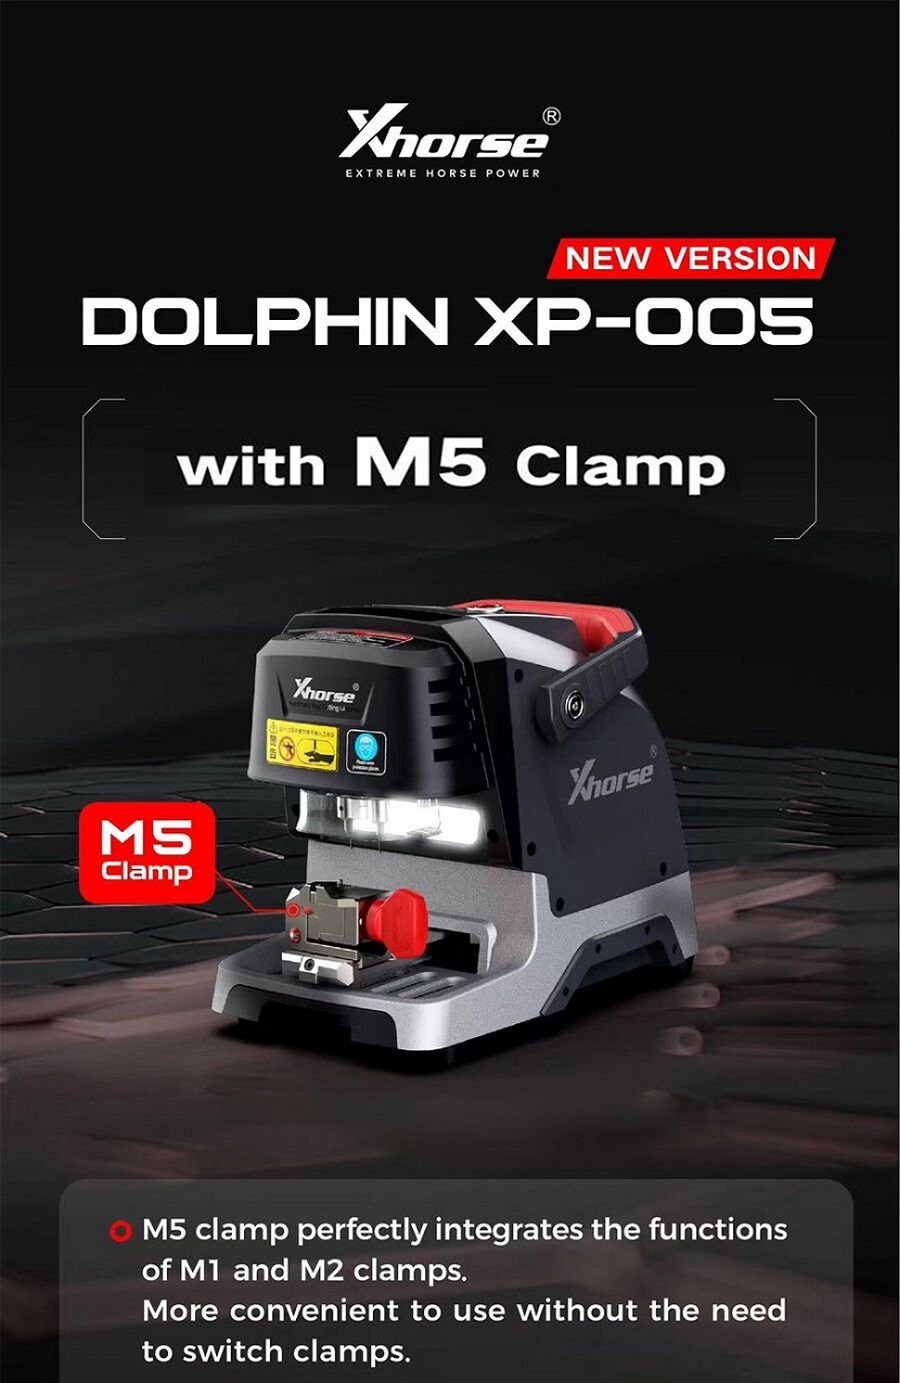 xhorse dolphin xp005 with m5 clamp